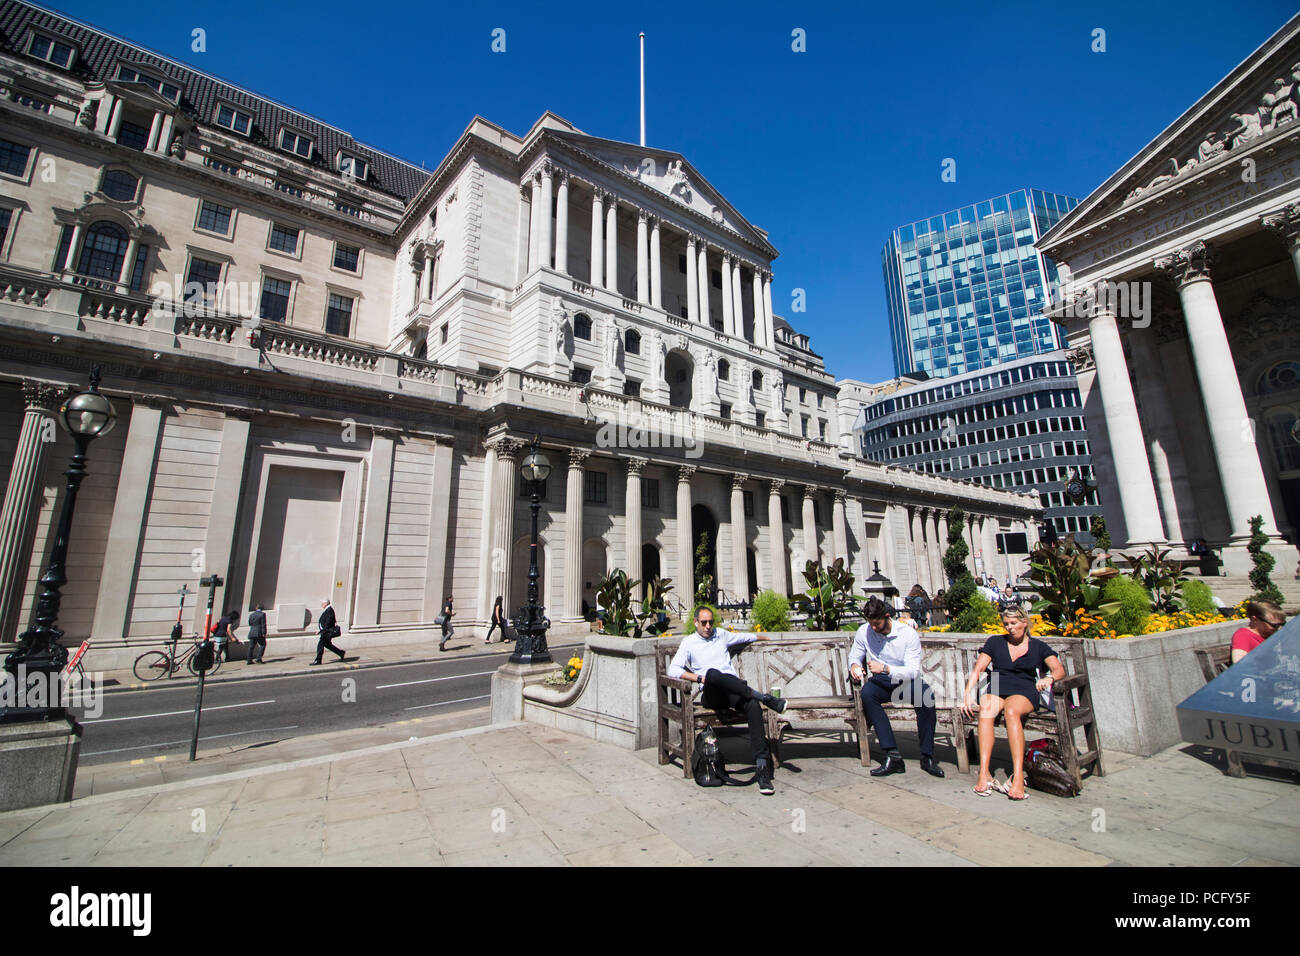 London UK. 2nd August 2018. The Bank of England  Monetary Policy Committee (MPC) has announced an interest rate rise by a quarter of a percentage point, from 0.5% to 0.75%  the highest level in 10 years since March 2009 and the interest rate  increase will hit nearly four million mortgage buyers Credit: amer ghazzal/Alamy Live News Stock Photo